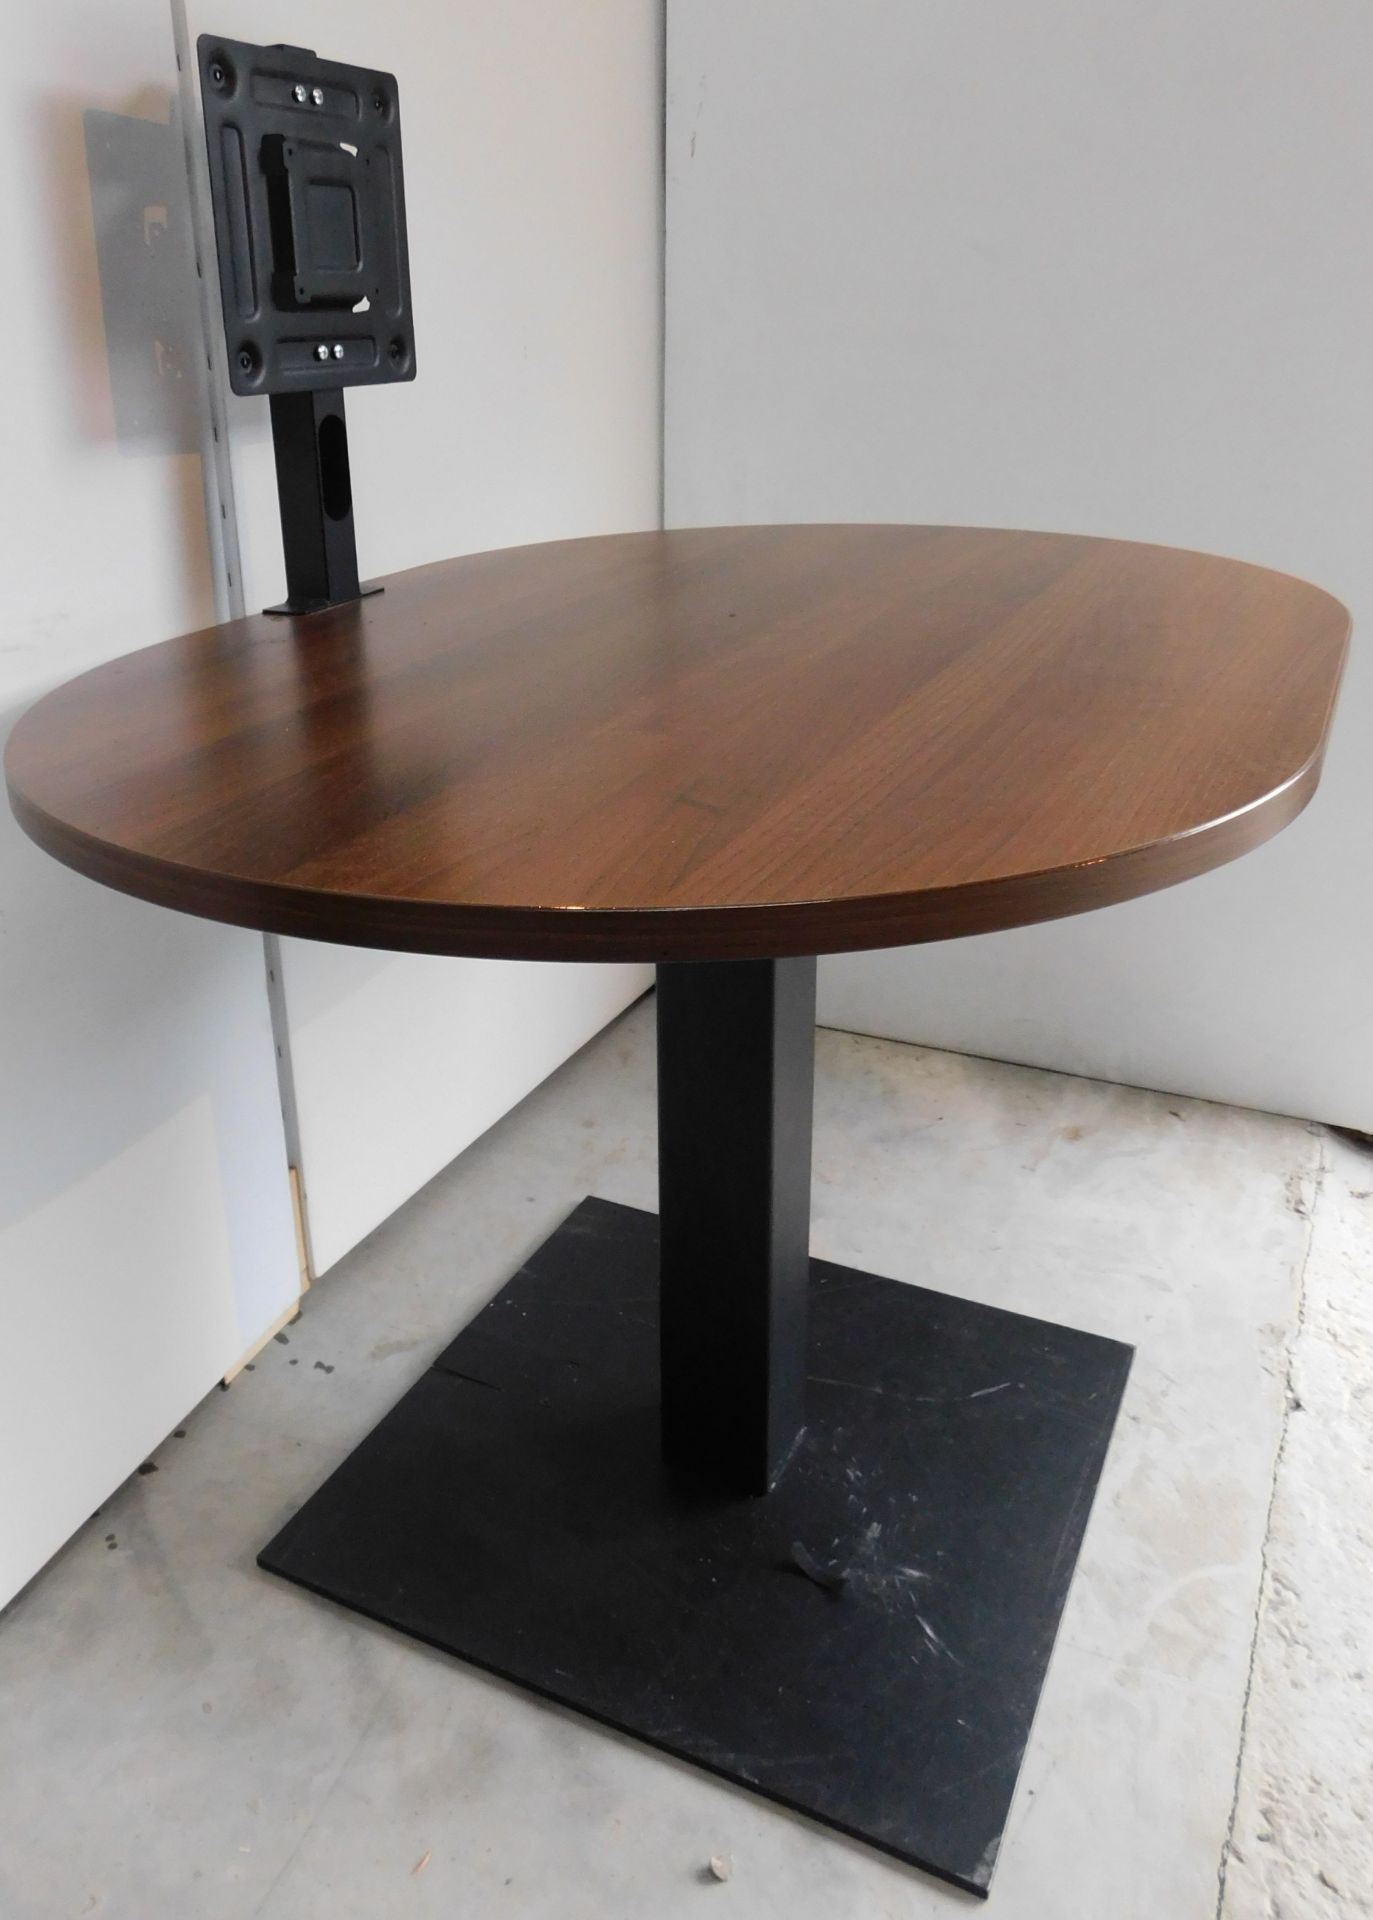 “Desk Stop” American Walnut Effect Multimedia ESA Table with Monitor Bracket, Steel Support & - Image 2 of 2